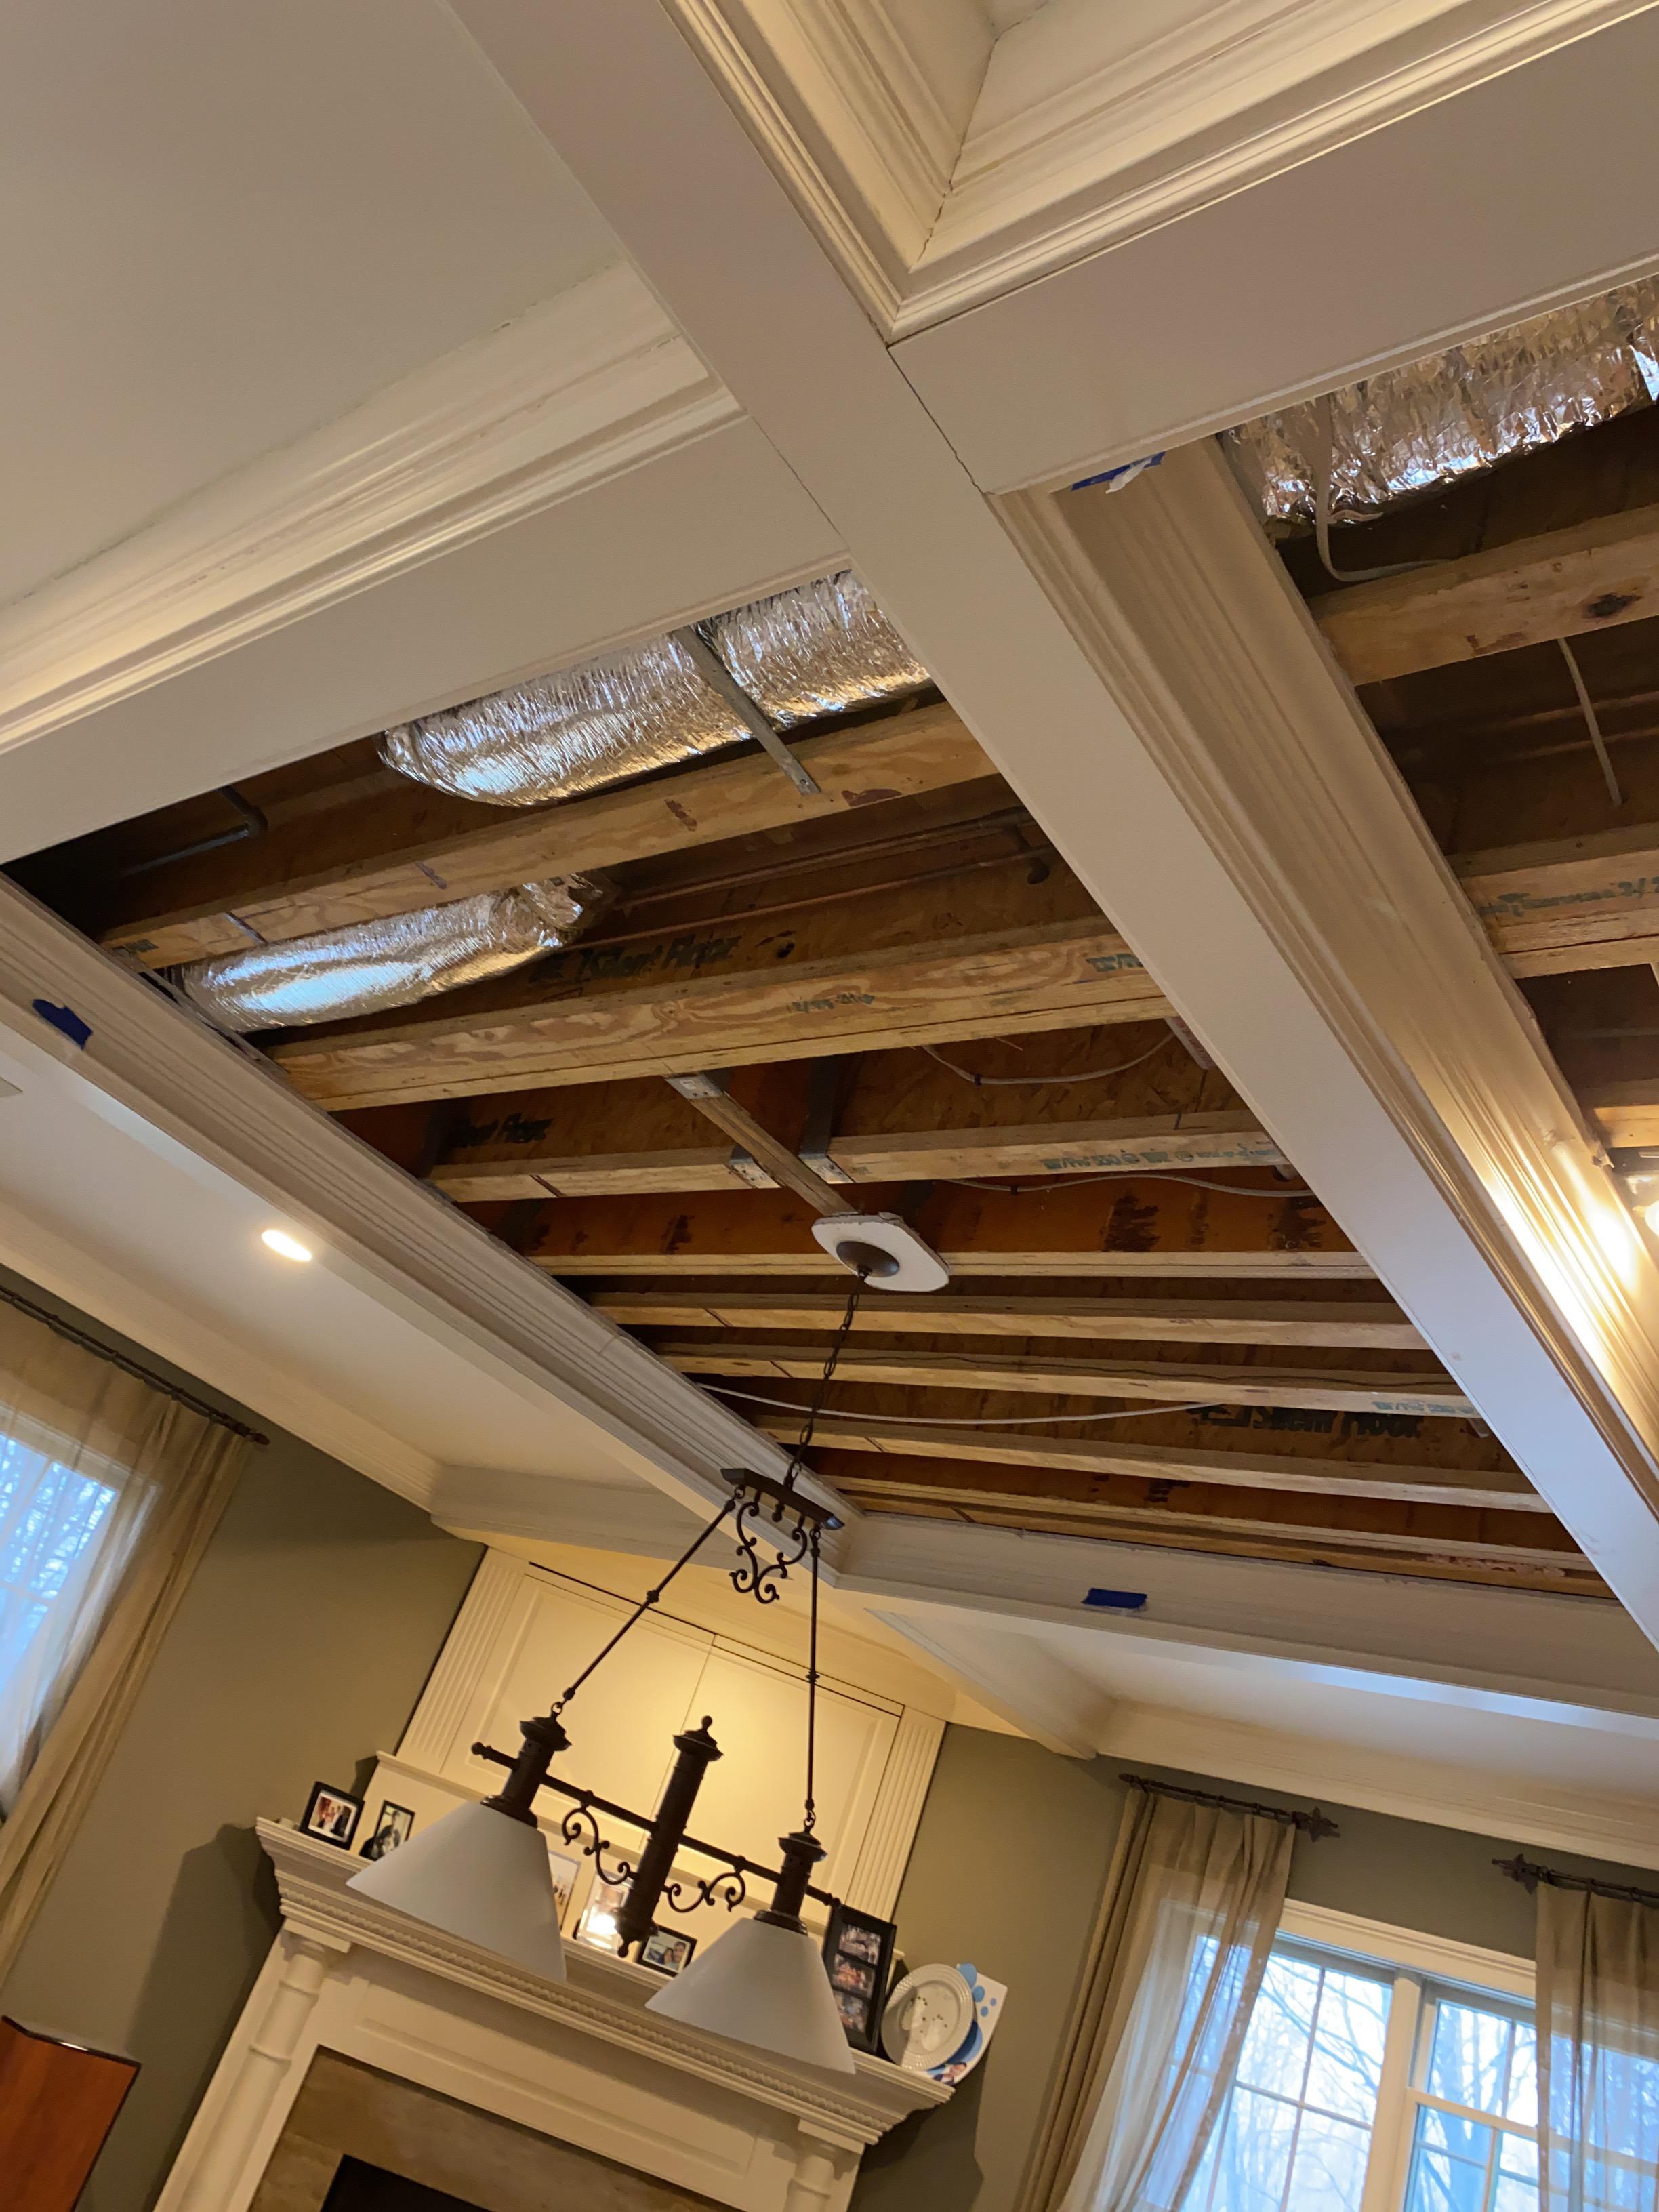 Wet ceiling removed